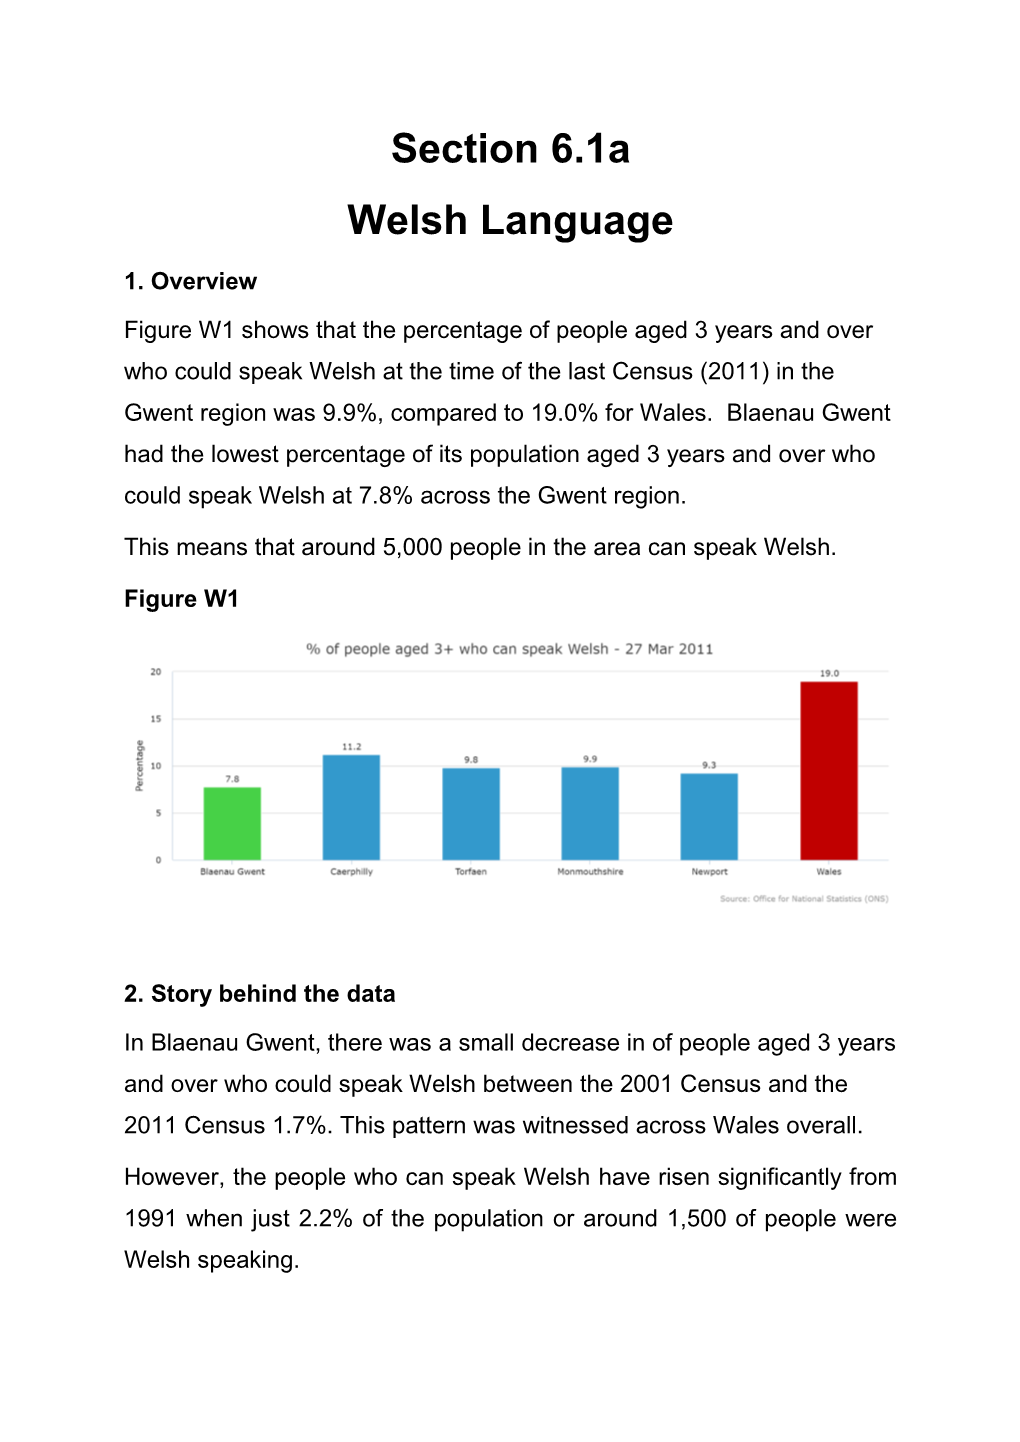 Section 6.1A Welsh Language